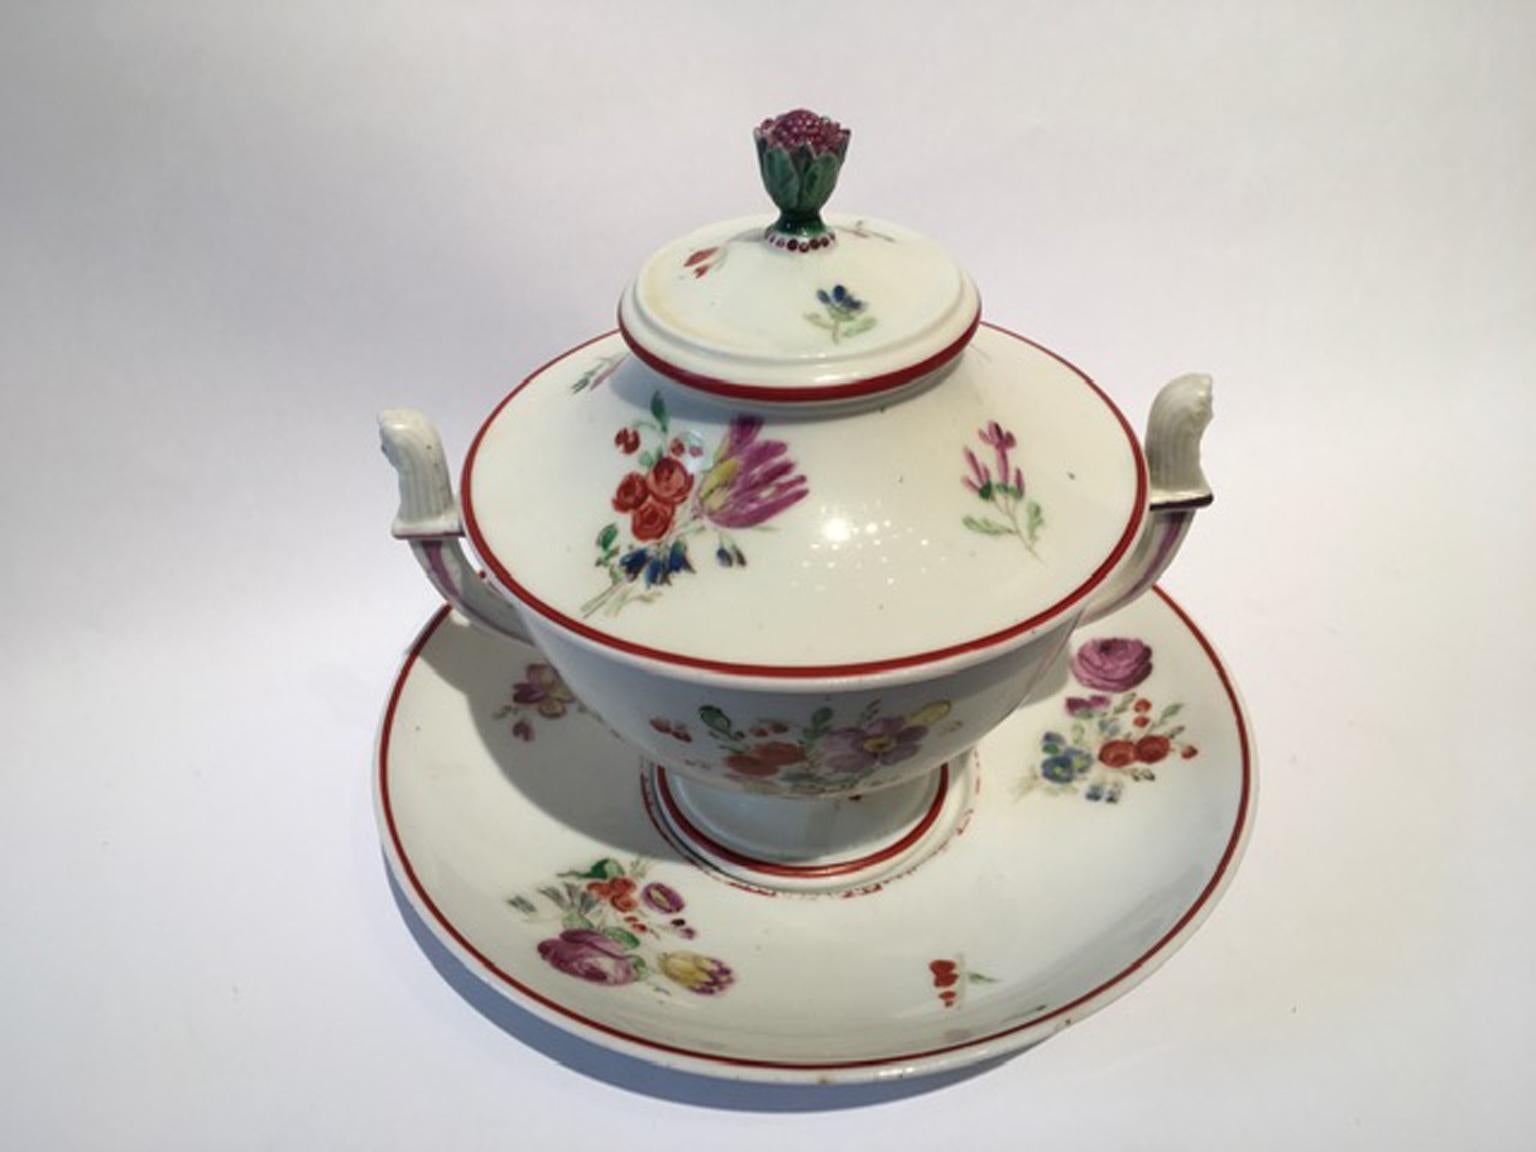 This fine and elegant sugar bowl in neoclassical style is a piece handmade by the well known Italian factory Richard Ginori in Doccia. The set is composed by three pieces: the sugar bowl, the cover and the dish.
In perfect conditions, no